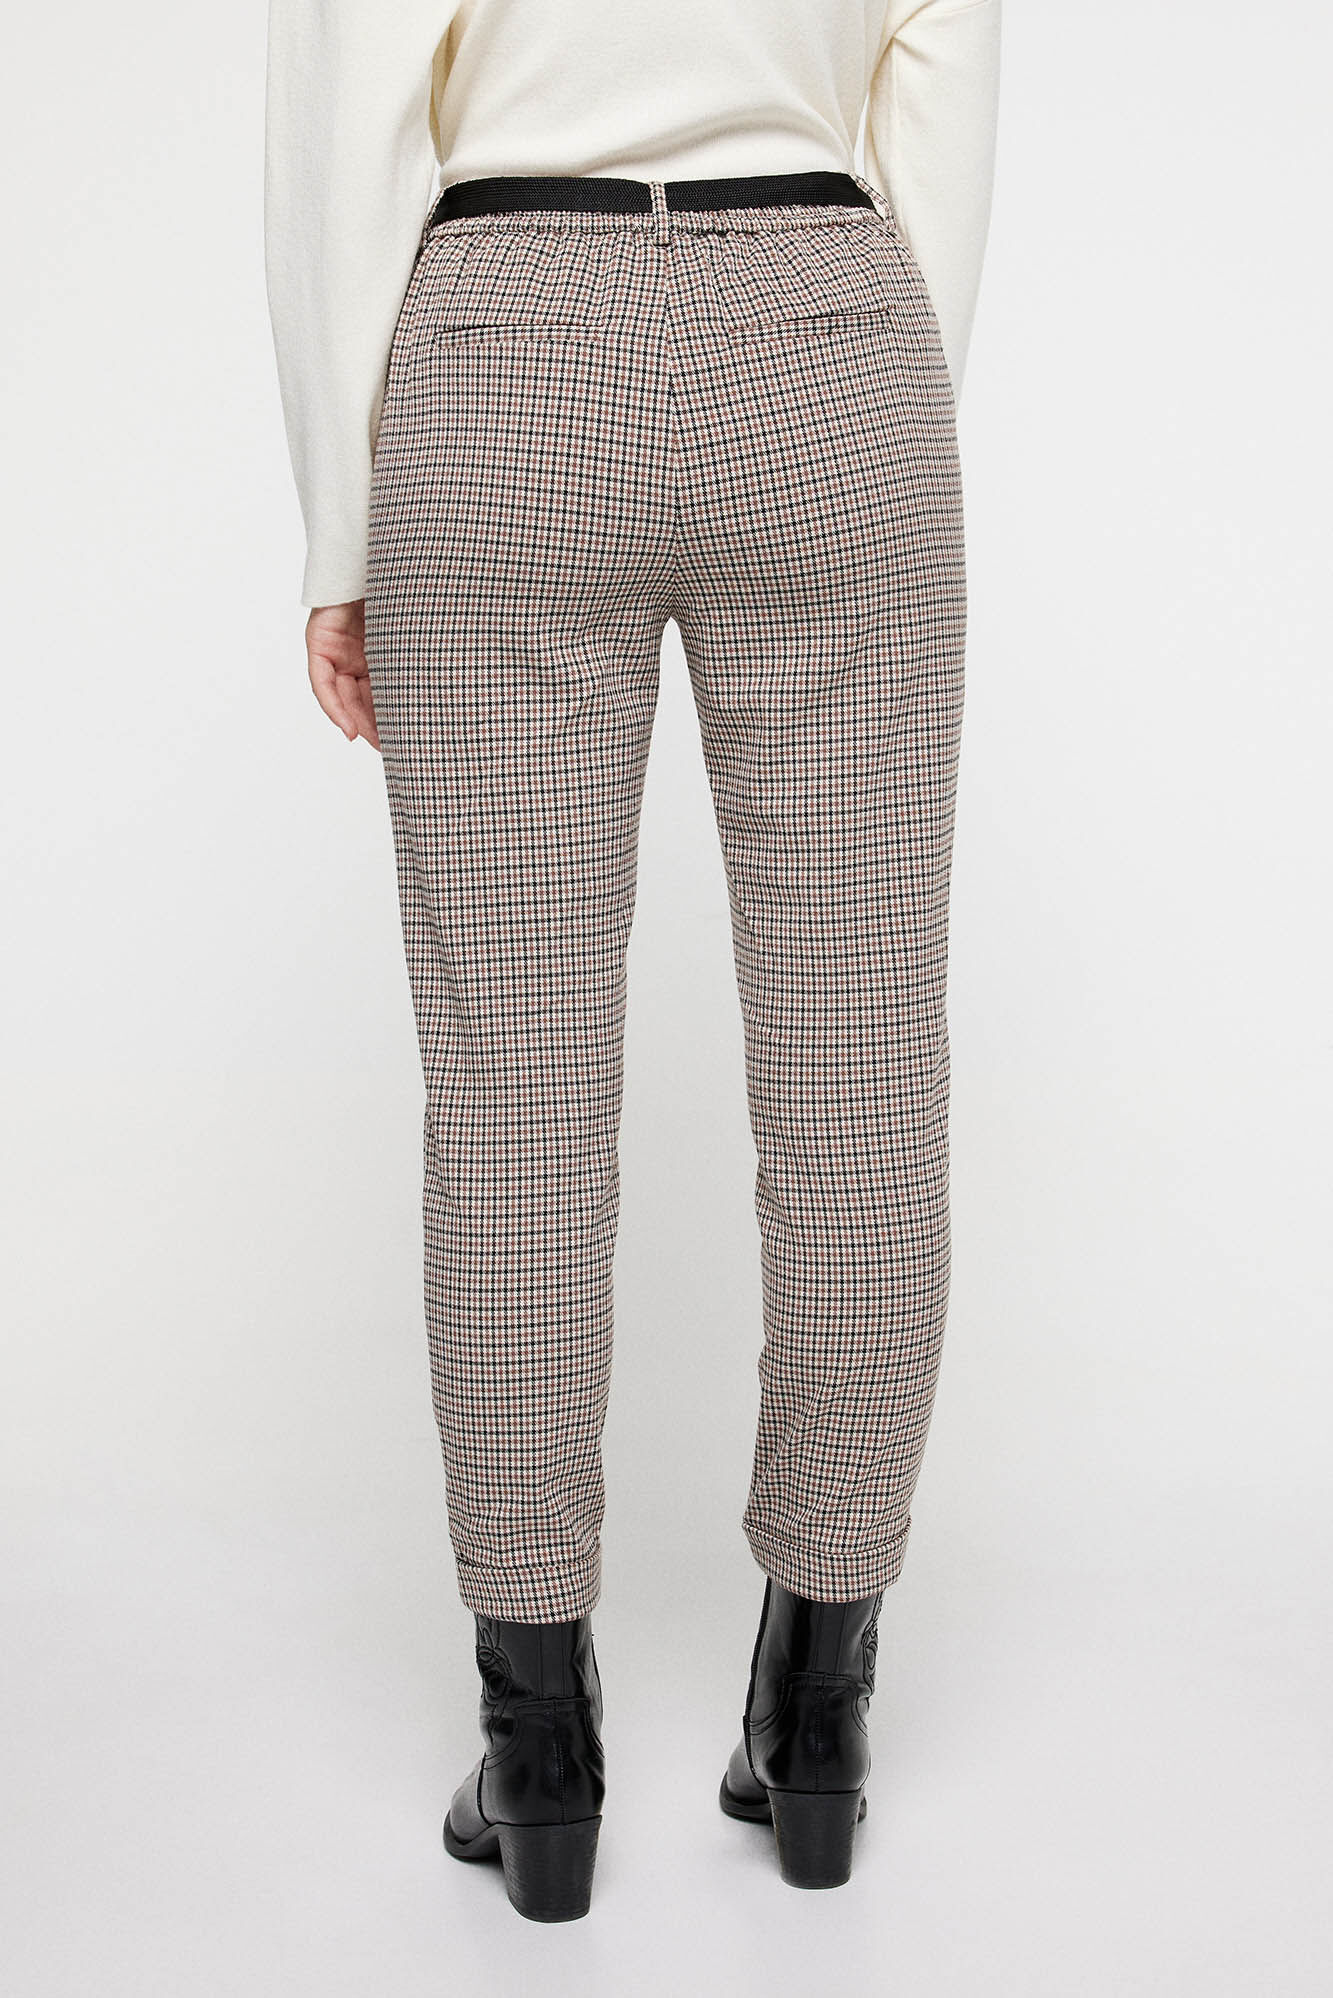 Sandro Straight-leg Checked Trousers houndstooth brown stripe womens 36 us  4 | eBay